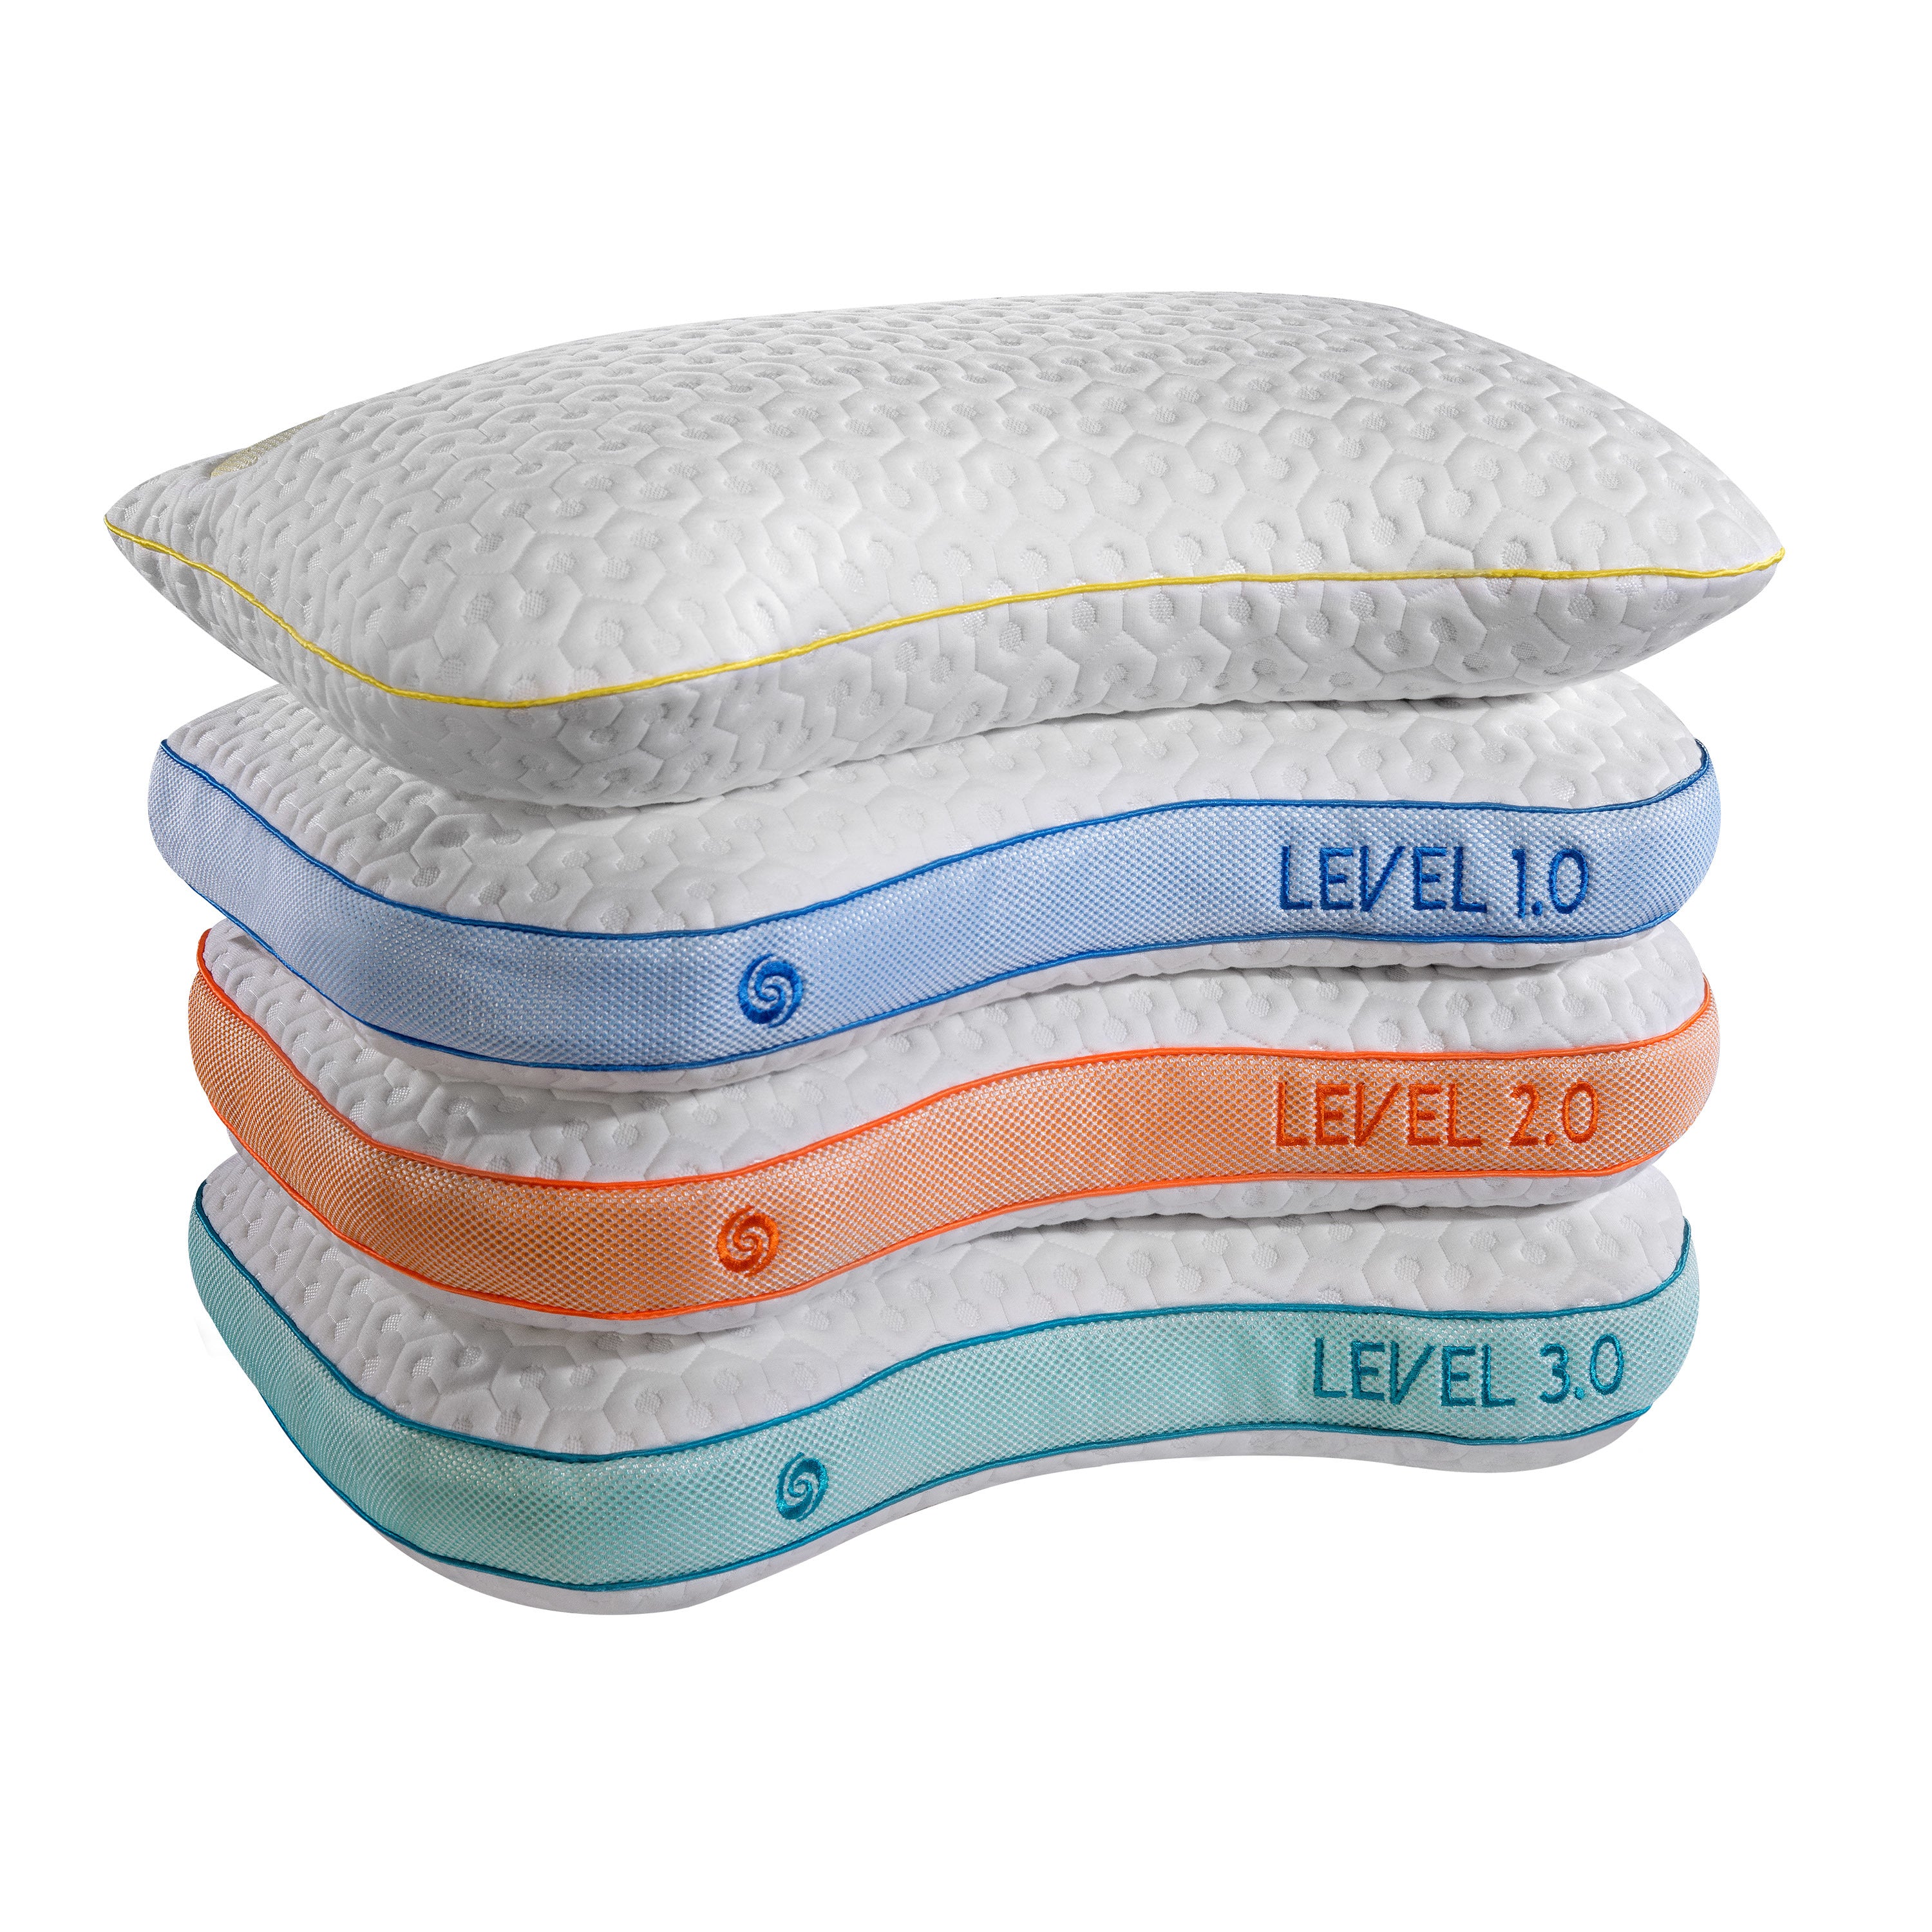 Bedgear Level 3.0 Pillow provides a supportive and comfortable night sleep like you've never before experienced - Curated By Norwood Bedgear 3.0 | The New Pillow Series by Bedgear Pillow | Bedgear Pillow Level Series | 3.0 Pillow by Bedgear | Bedgear 3.0 Pillow